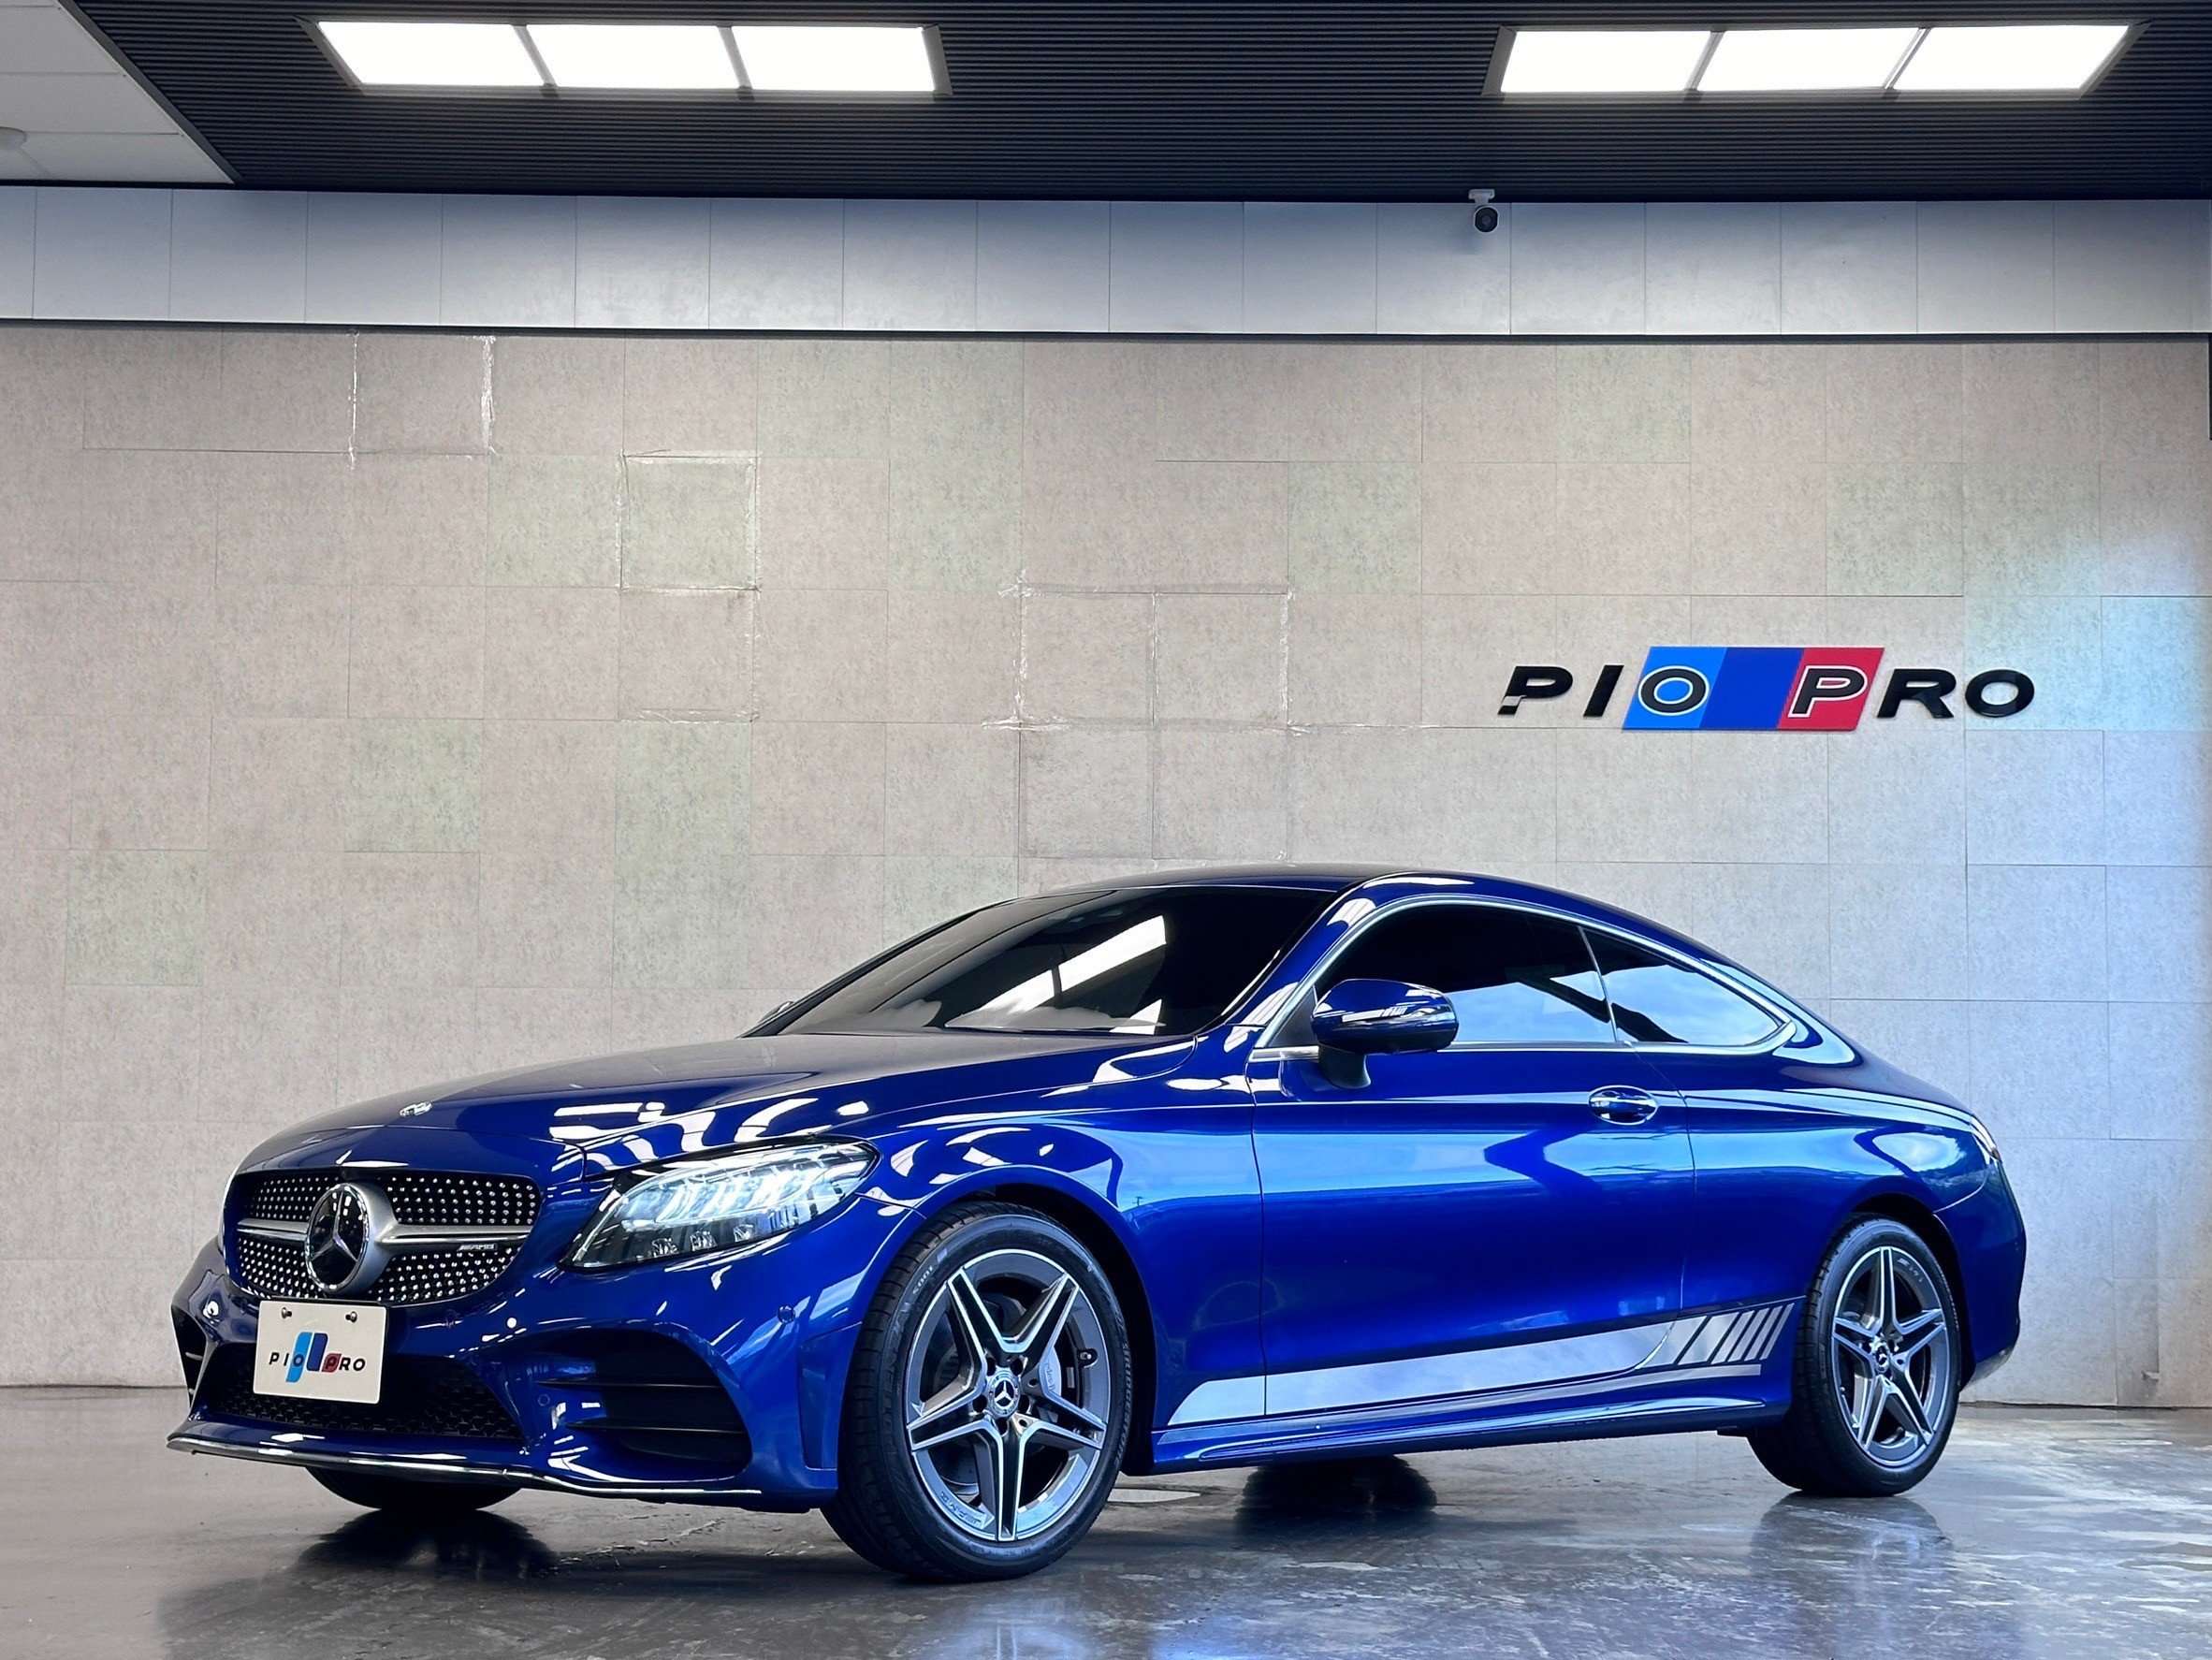 2020 M-Benz 賓士 C-class coupe